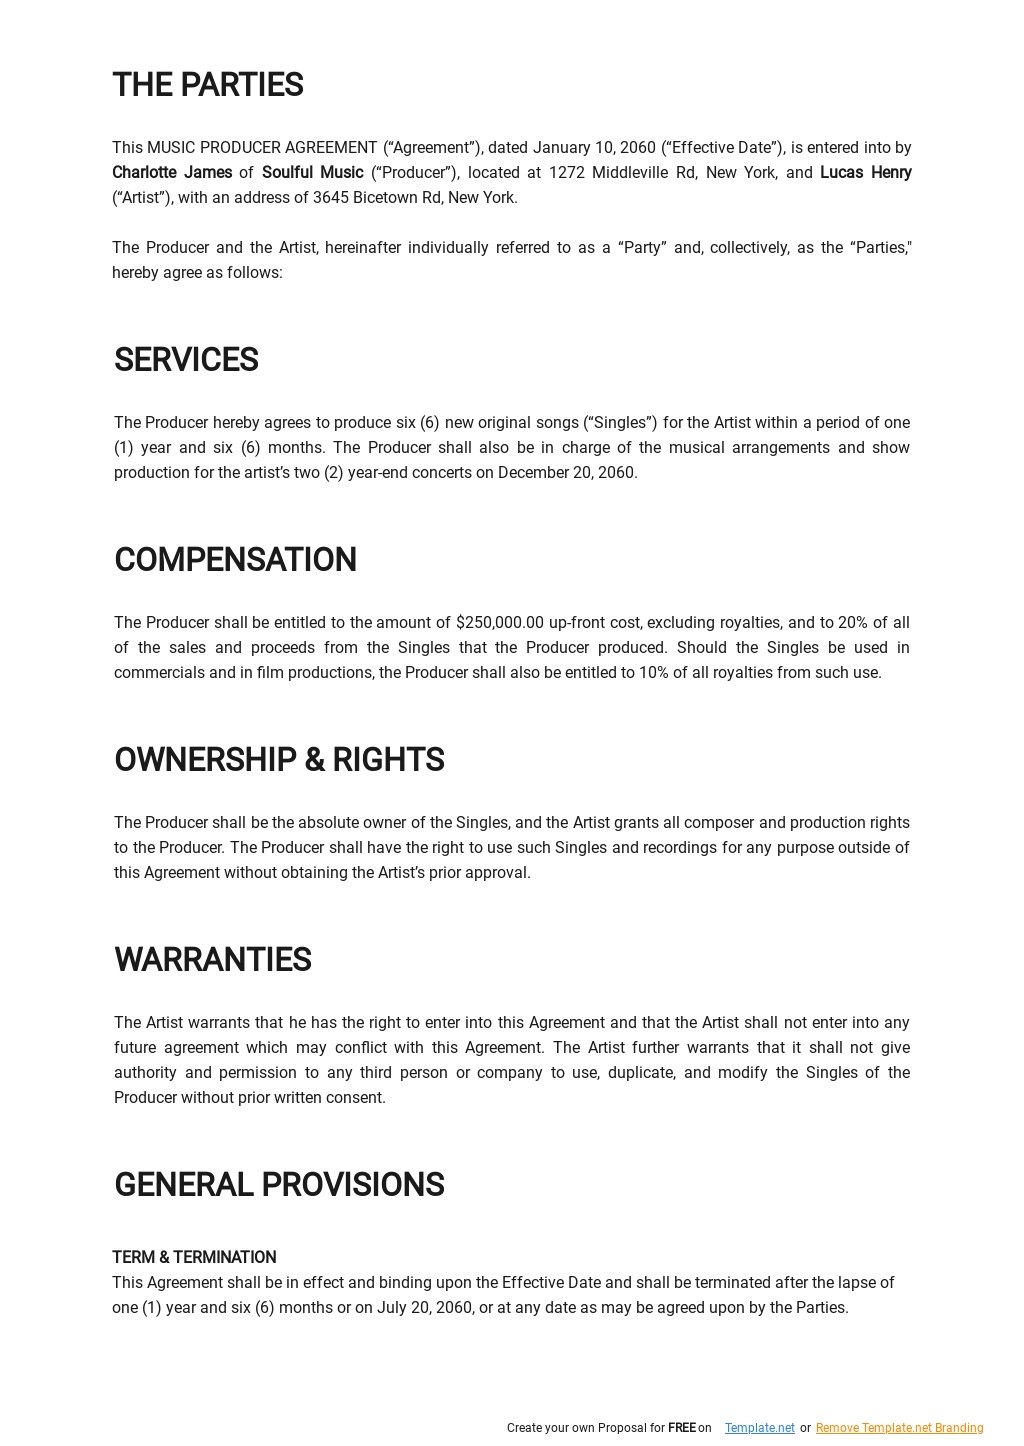 Music Producer Agreement Template